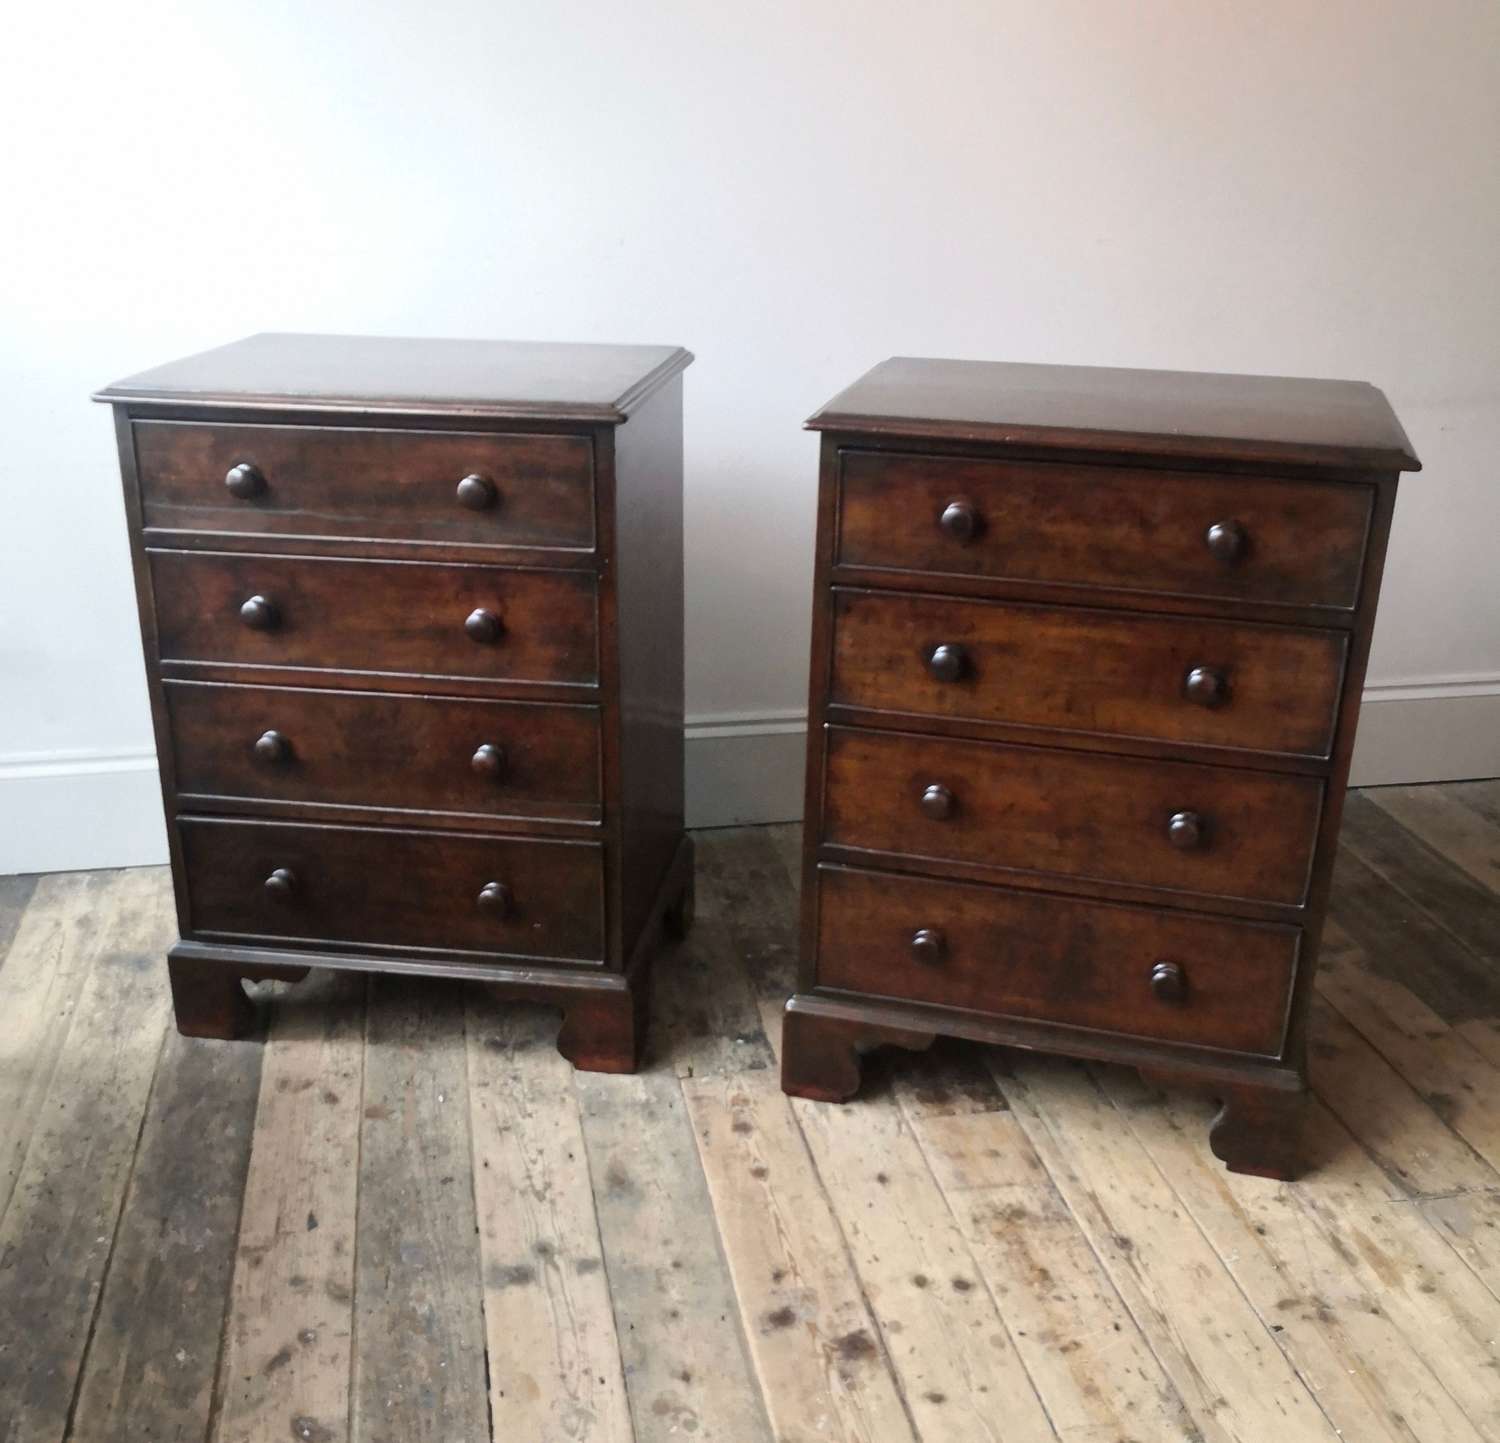 A pair of 19th century chests of drawers